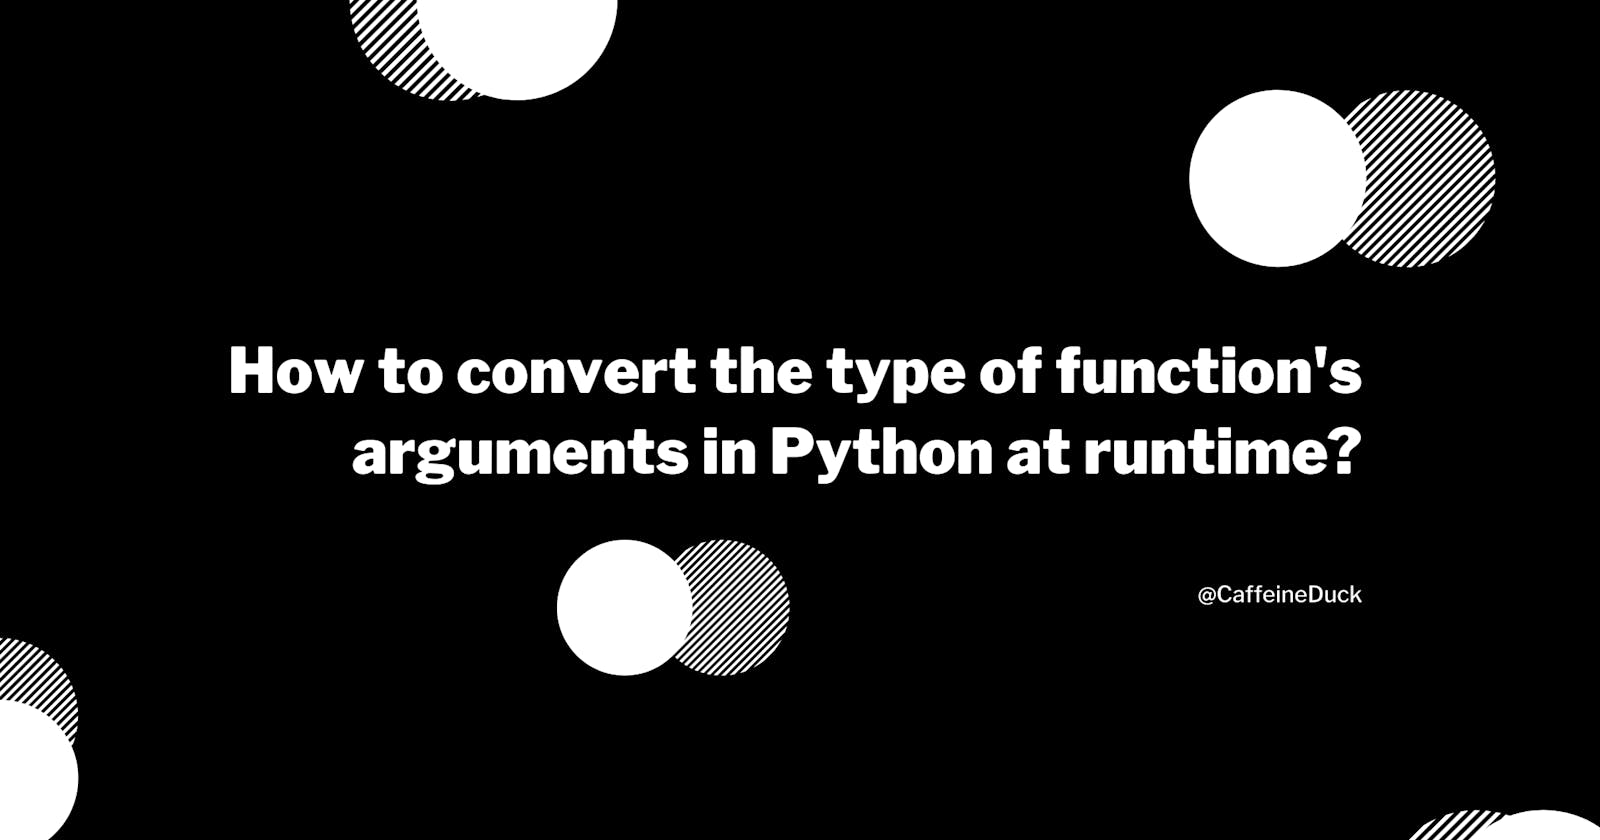 How to convert the type of function's arguments in Python at runtime?